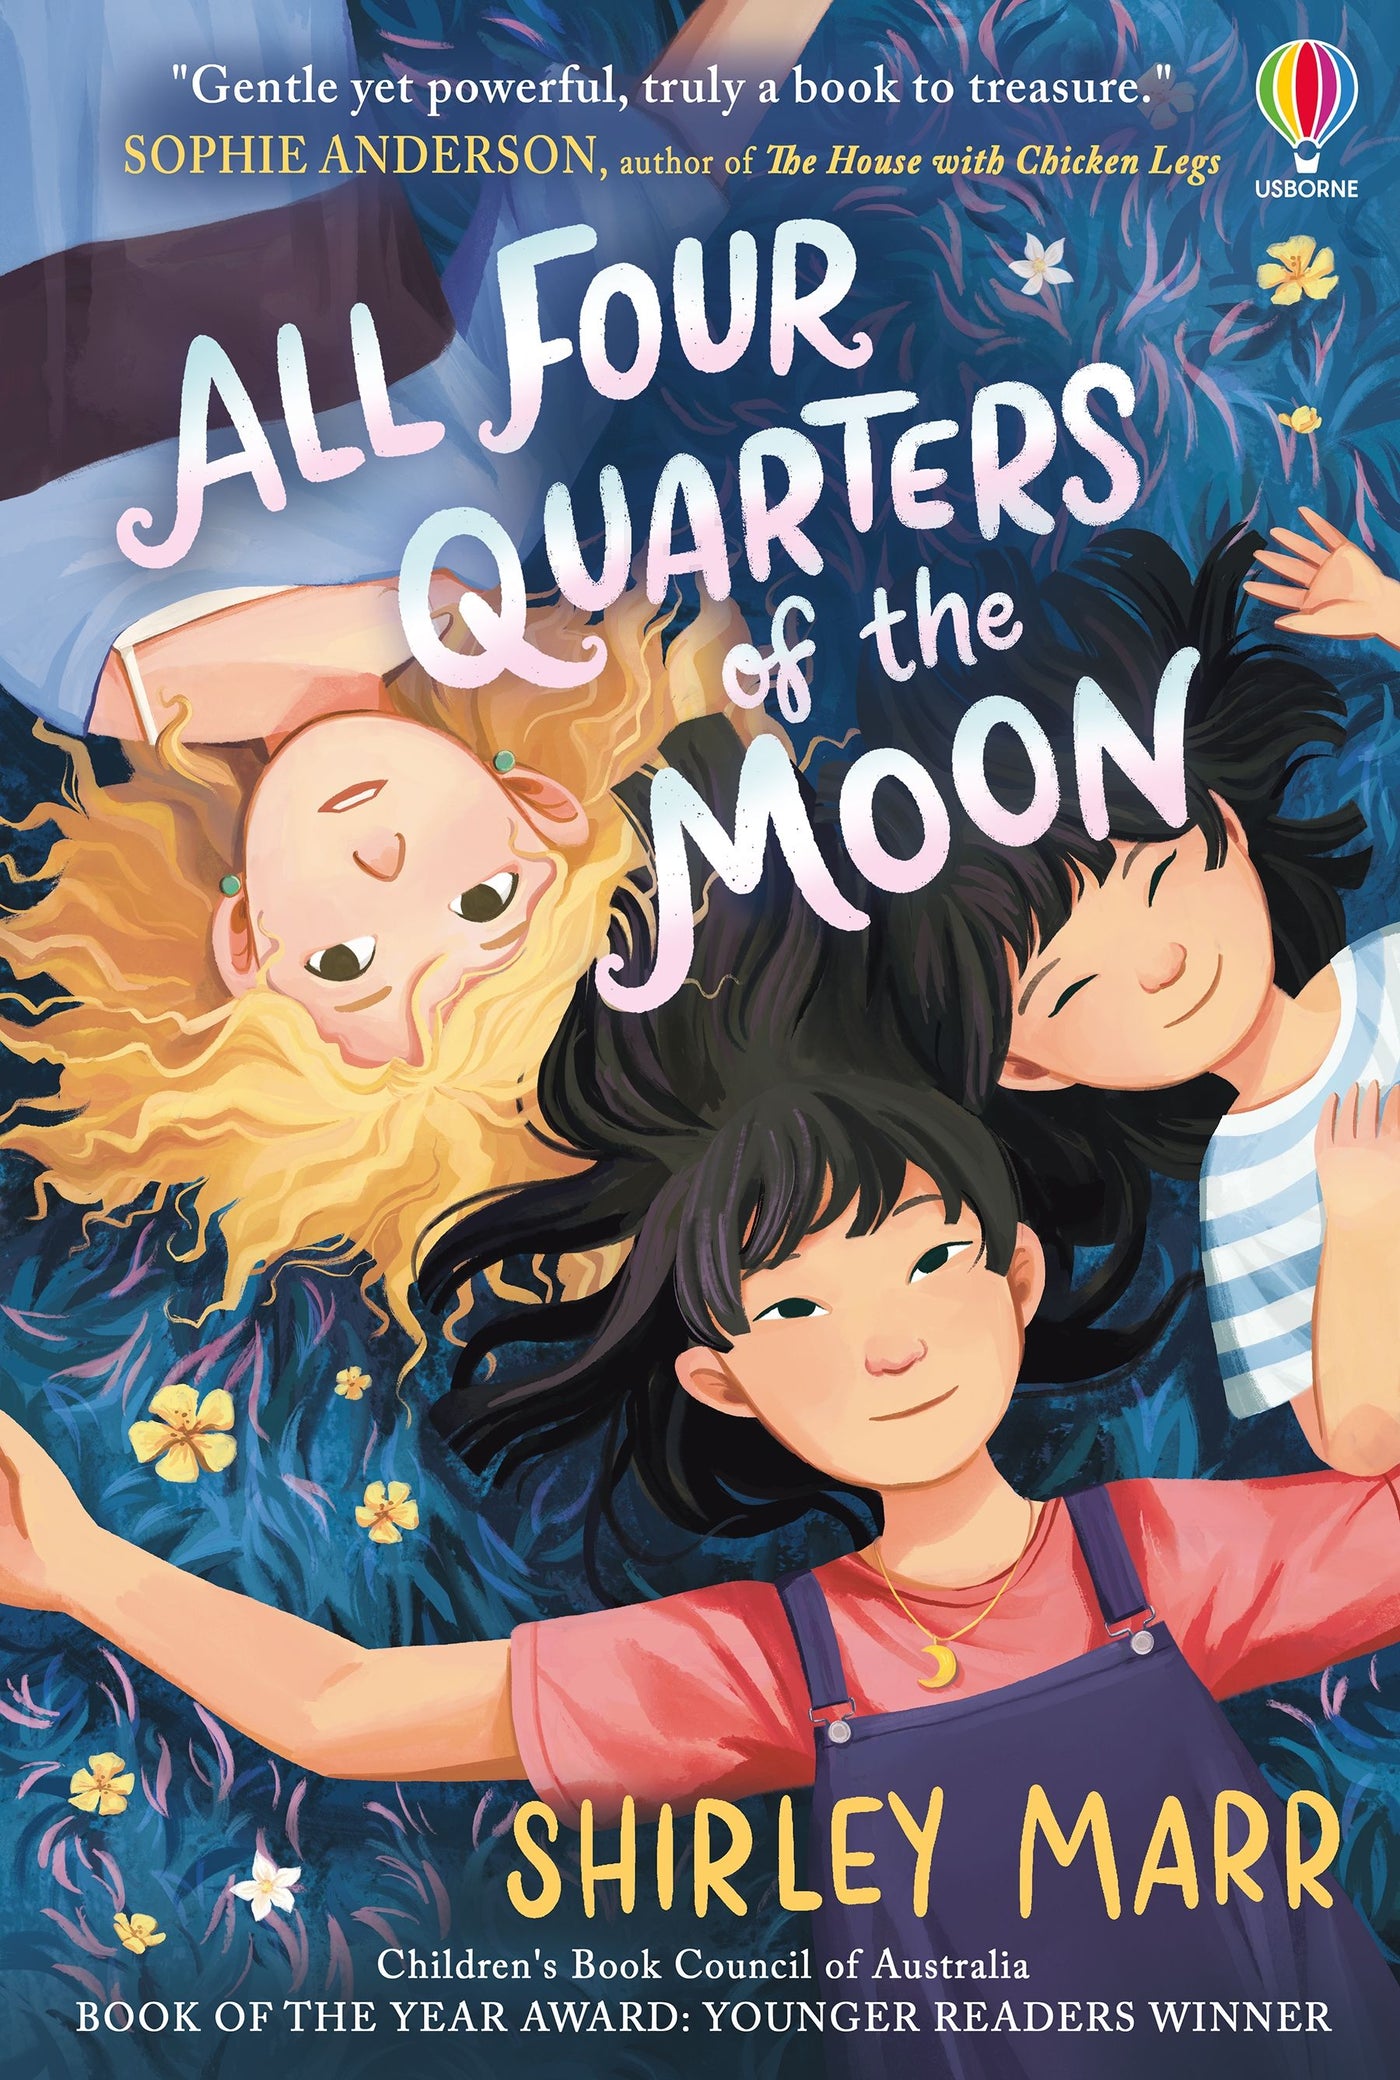 All Four Quarters of the Moon - Paperback: Shirley Marr | Usborne